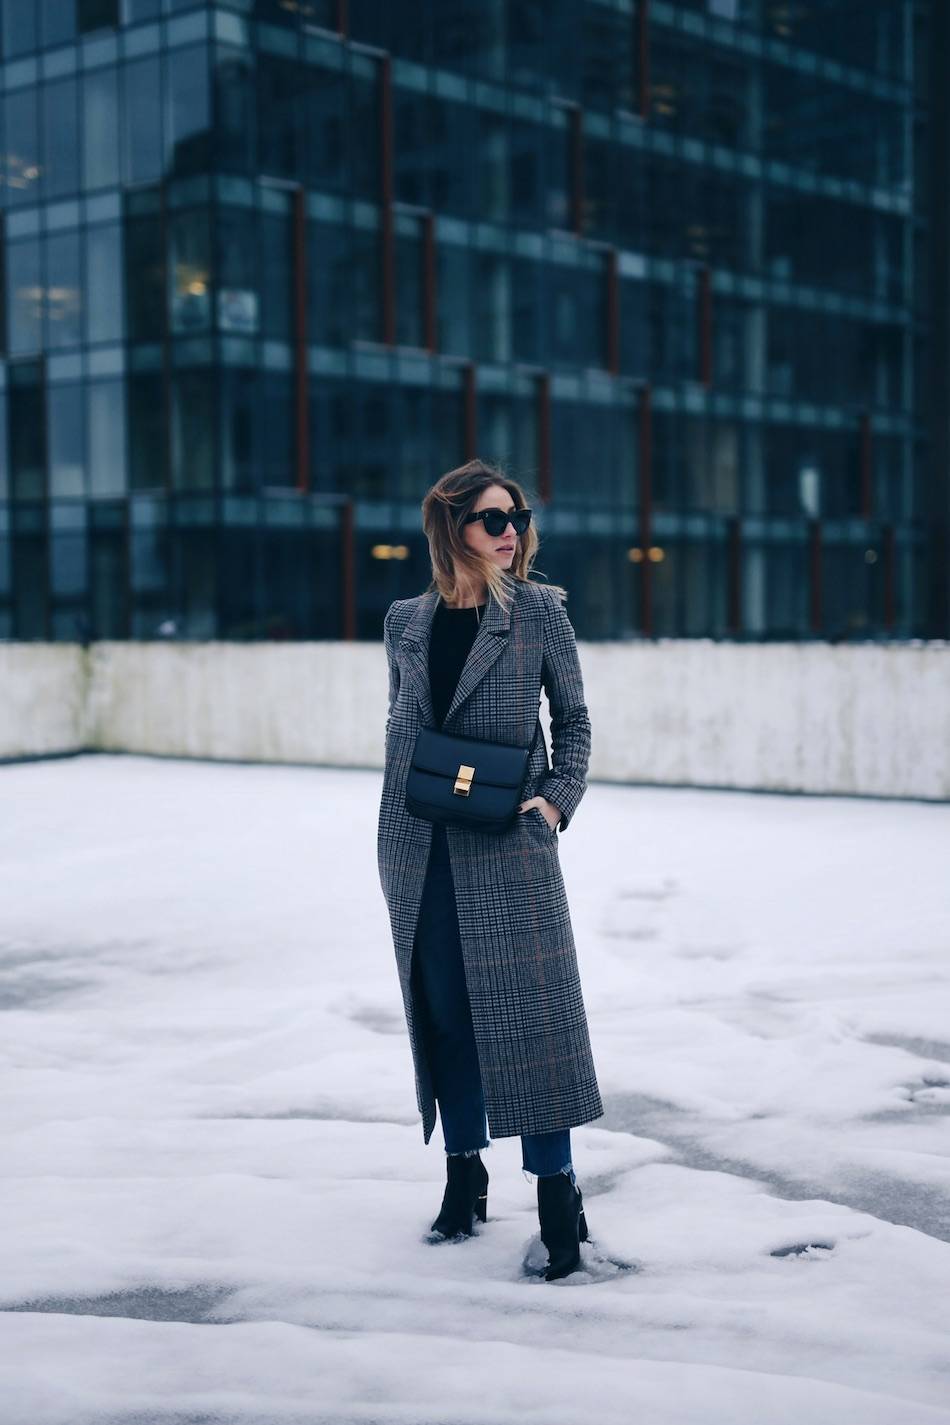 Style and beauty blogger Jill Lansky of The August Diaries in H&M plaid coat with Celine black box bag, GRLFRND jeans